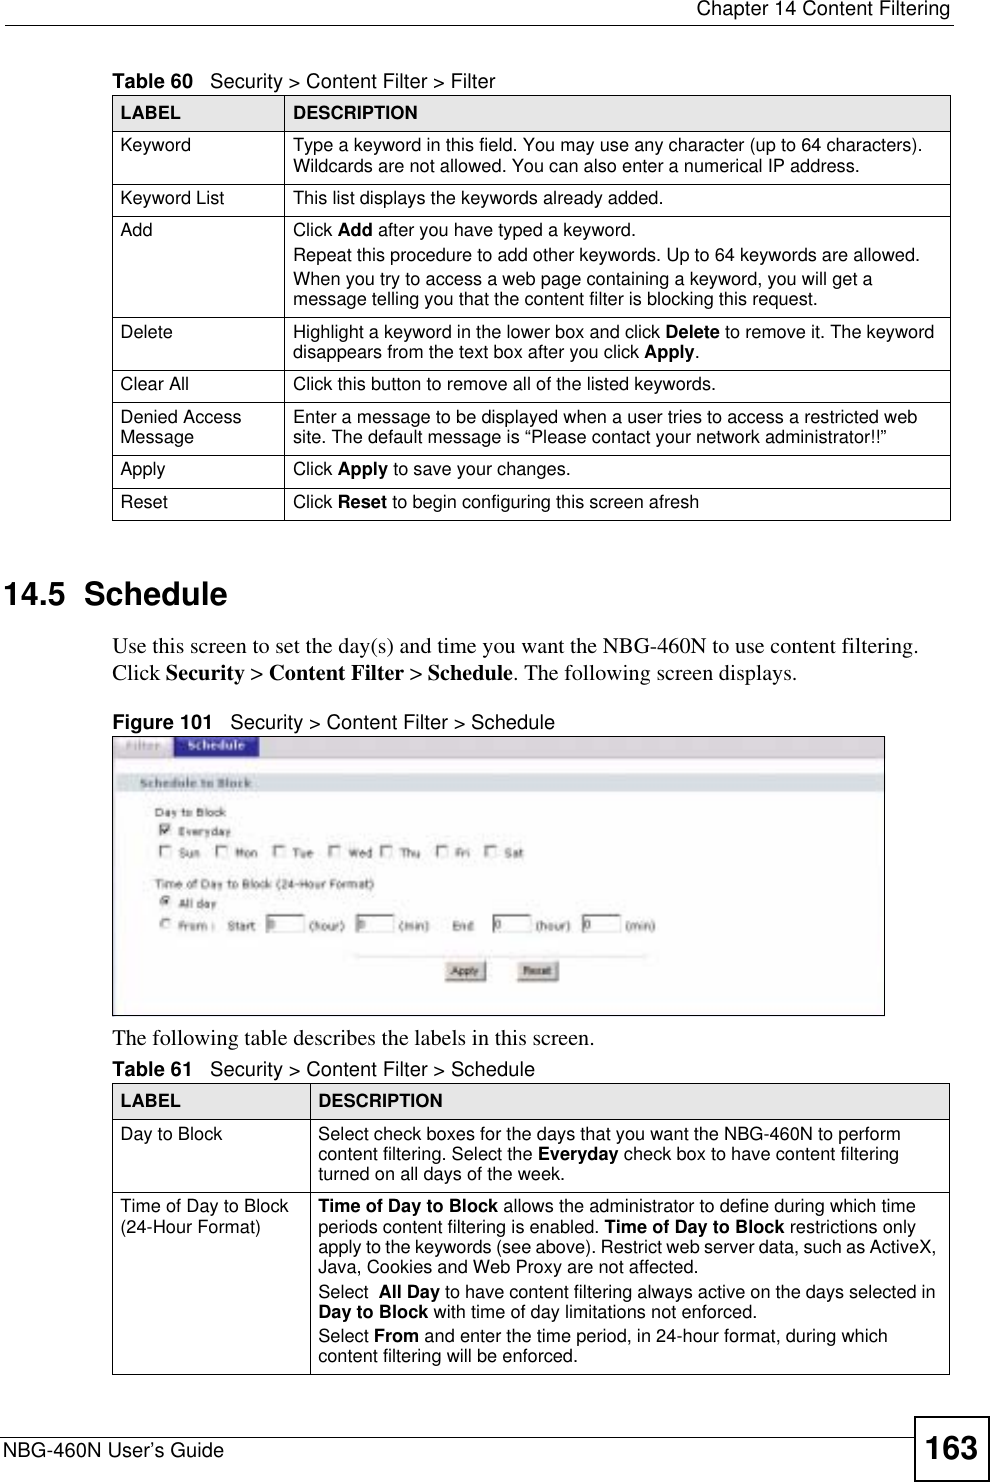  Chapter 14 Content FilteringNBG-460N User’s Guide 16314.5  ScheduleUse this screen to set the day(s) and time you want the NBG-460N to use content filtering. Click Security &gt; Content Filter &gt; Schedule. The following screen displays.Figure 101   Security &gt; Content Filter &gt; ScheduleThe following table describes the labels in this screen.Keyword Type a keyword in this field. You may use any character (up to 64 characters). Wildcards are not allowed. You can also enter a numerical IP address.Keyword List This list displays the keywords already added. Add  Click Add after you have typed a keyword. Repeat this procedure to add other keywords. Up to 64 keywords are allowed.When you try to access a web page containing a keyword, you will get a message telling you that the content filter is blocking this request.Delete Highlight a keyword in the lower box and click Delete to remove it. The keyword disappears from the text box after you click Apply.Clear All Click this button to remove all of the listed keywords.Denied Access Message Enter a message to be displayed when a user tries to access a restricted web site. The default message is “Please contact your network administrator!!”Apply Click Apply to save your changes.Reset Click Reset to begin configuring this screen afreshTable 60   Security &gt; Content Filter &gt; FilterLABEL DESCRIPTIONTable 61   Security &gt; Content Filter &gt; ScheduleLABEL DESCRIPTIONDay to Block Select check boxes for the days that you want the NBG-460N to perform content filtering. Select the Everyday check box to have content filtering turned on all days of the week.Time of Day to Block (24-Hour Format) Time of Day to Block allows the administrator to define during which time periods content filtering is enabled. Time of Day to Block restrictions only apply to the keywords (see above). Restrict web server data, such as ActiveX, Java, Cookies and Web Proxy are not affected.Select All Day to have content filtering always active on the days selected in Day to Block with time of day limitations not enforced.Select From and enter the time period, in 24-hour format, during which content filtering will be enforced. 